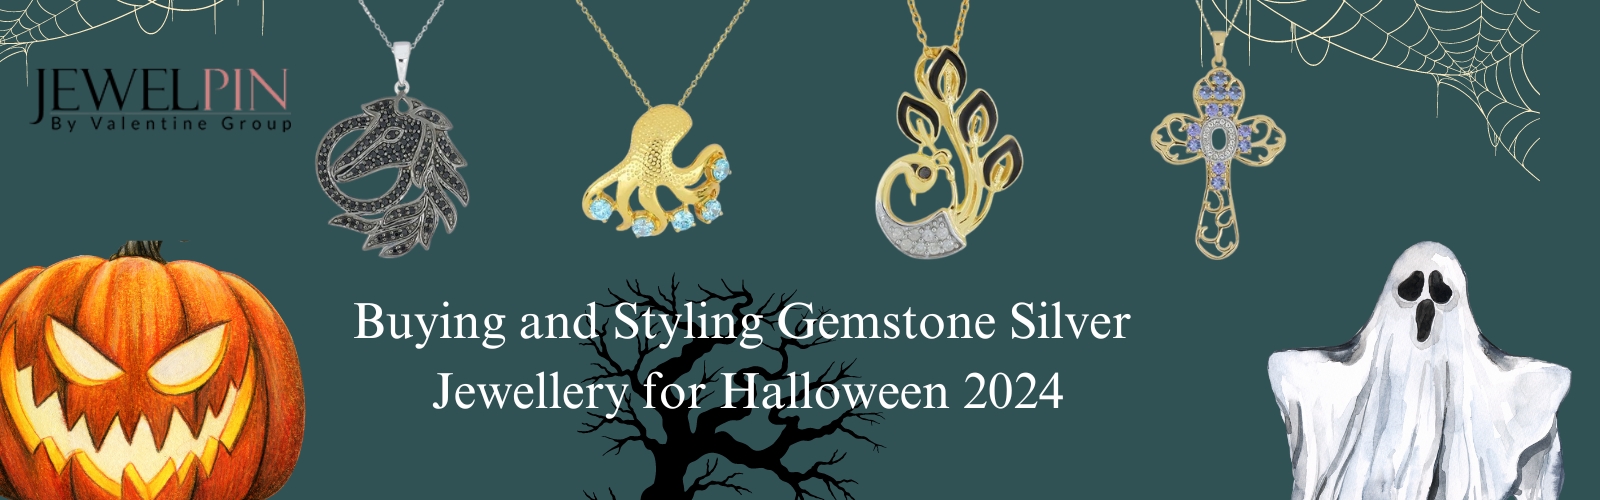 buying and styling gemstone silver jewellery for halloween 2024